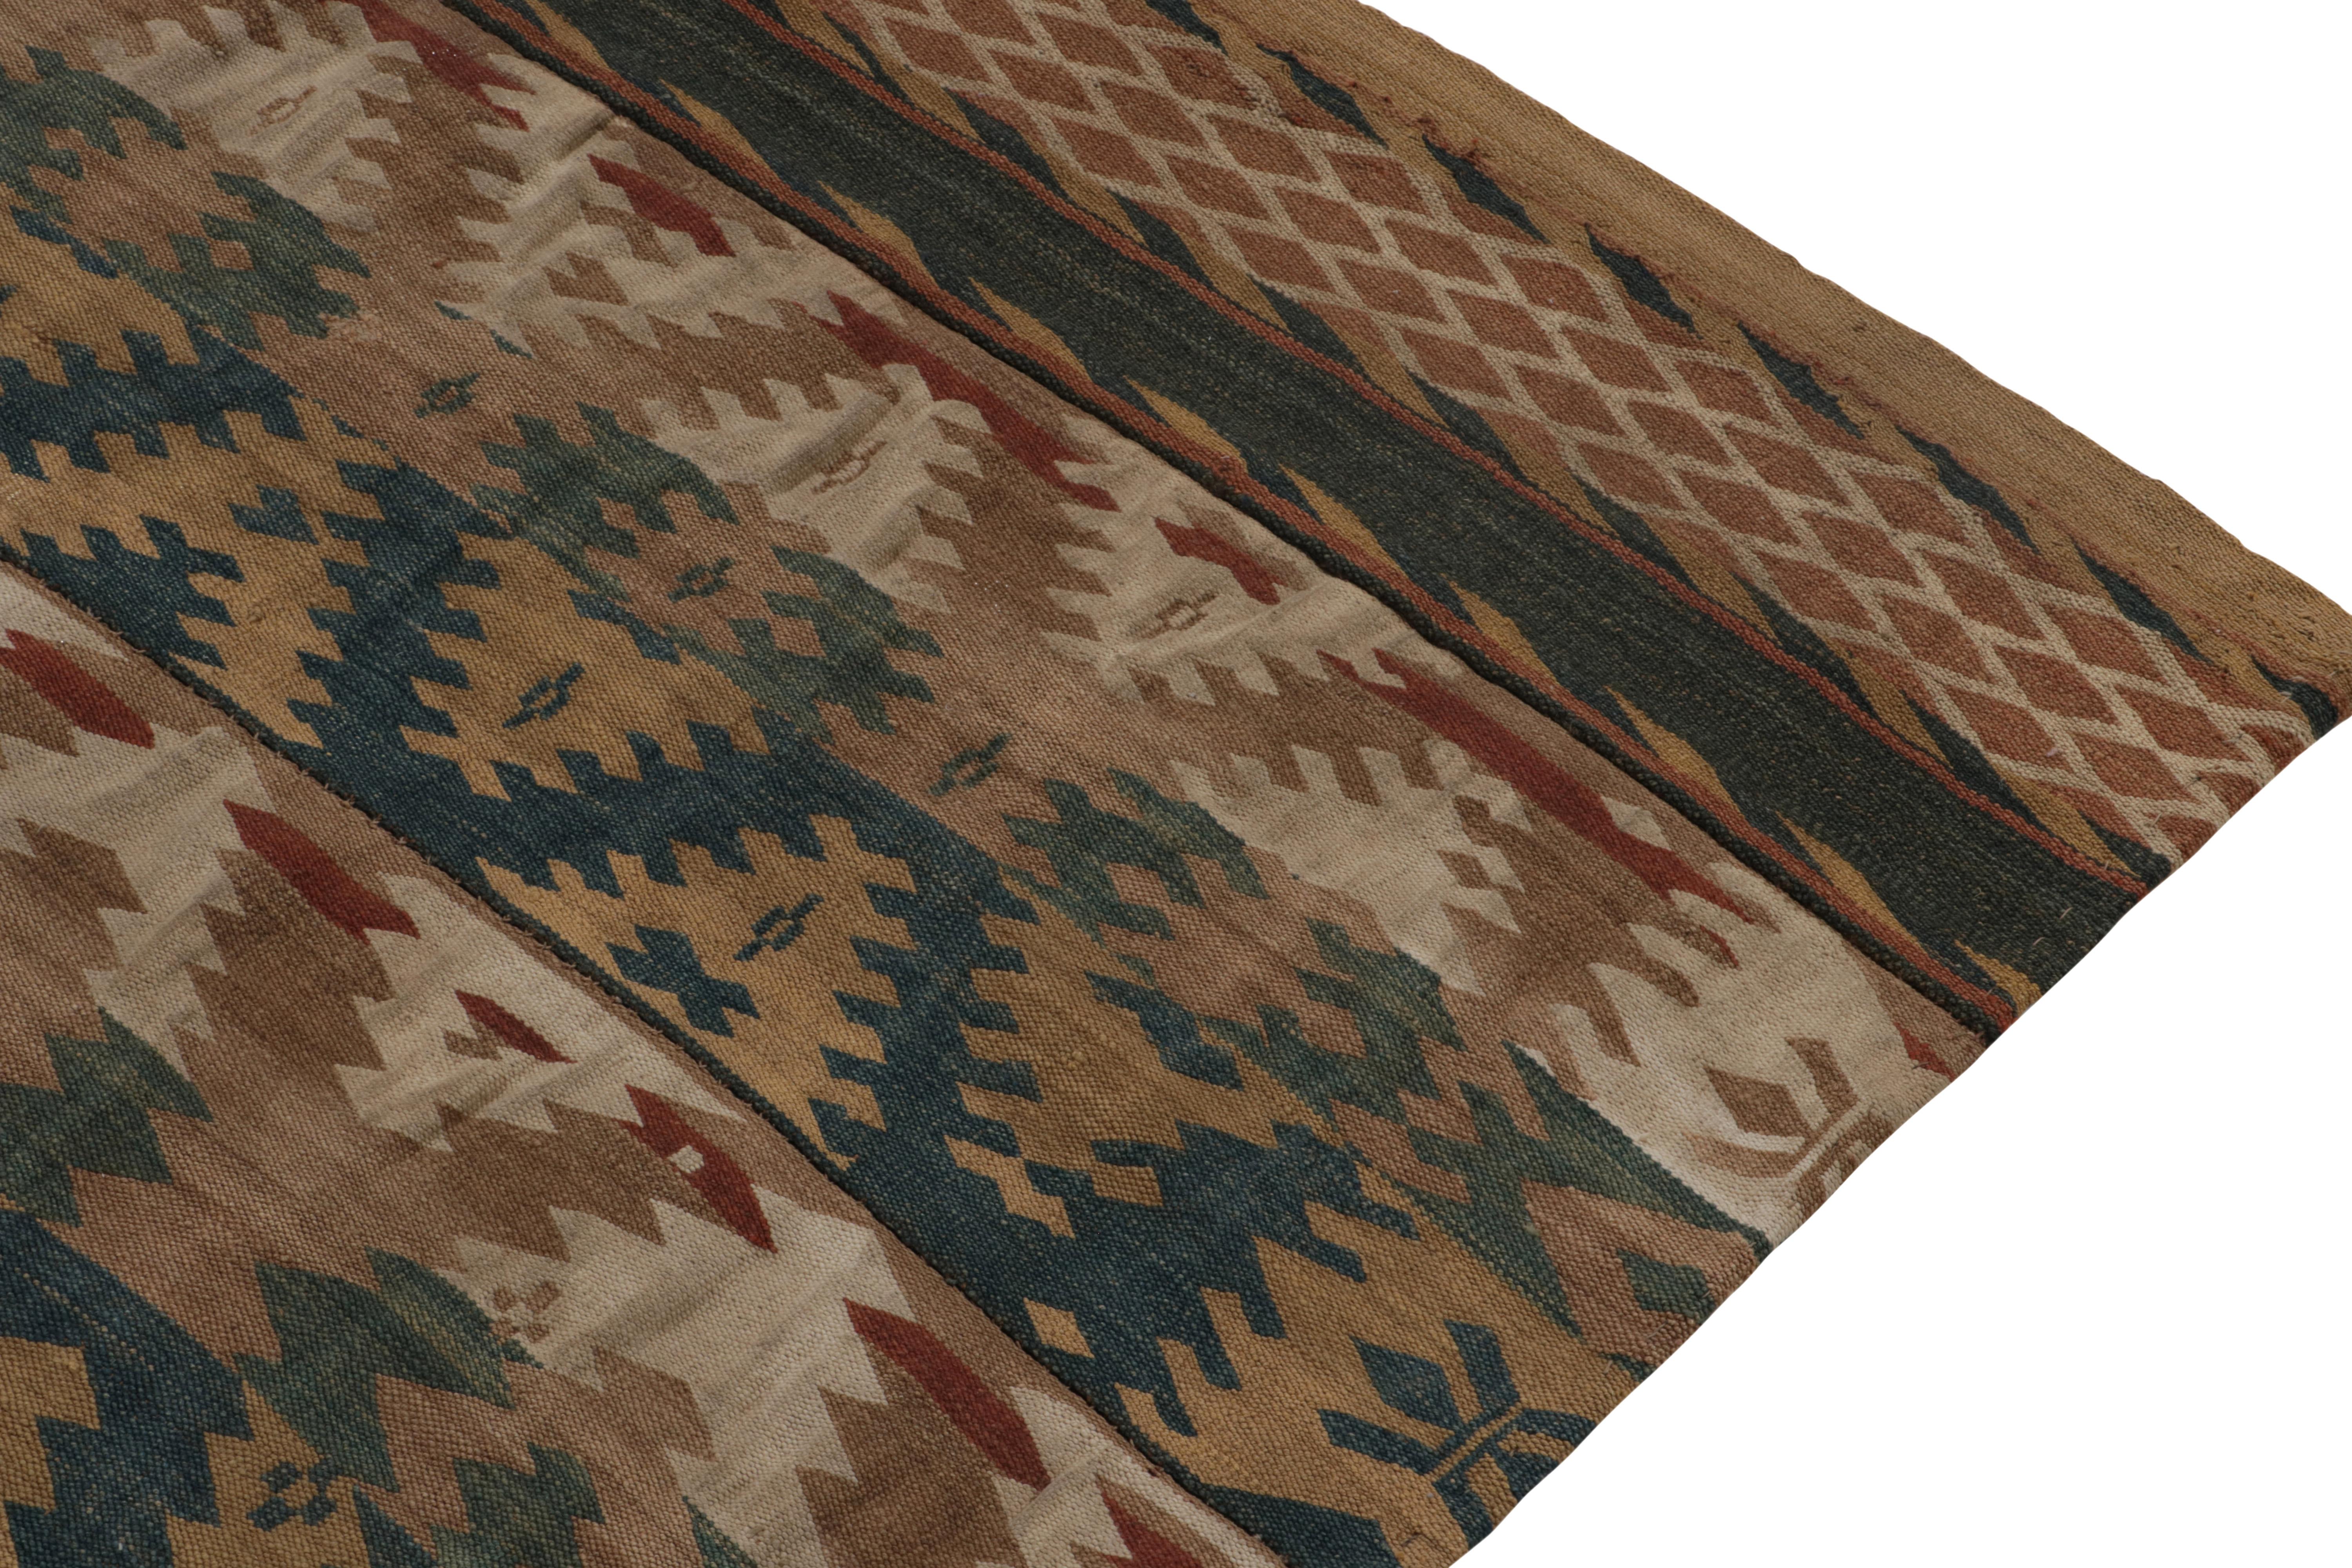 Hand-Knotted Vintage Kilim rug in Brown, Blue, Green Tribal Geometric Pattern by Rug & Kilim For Sale